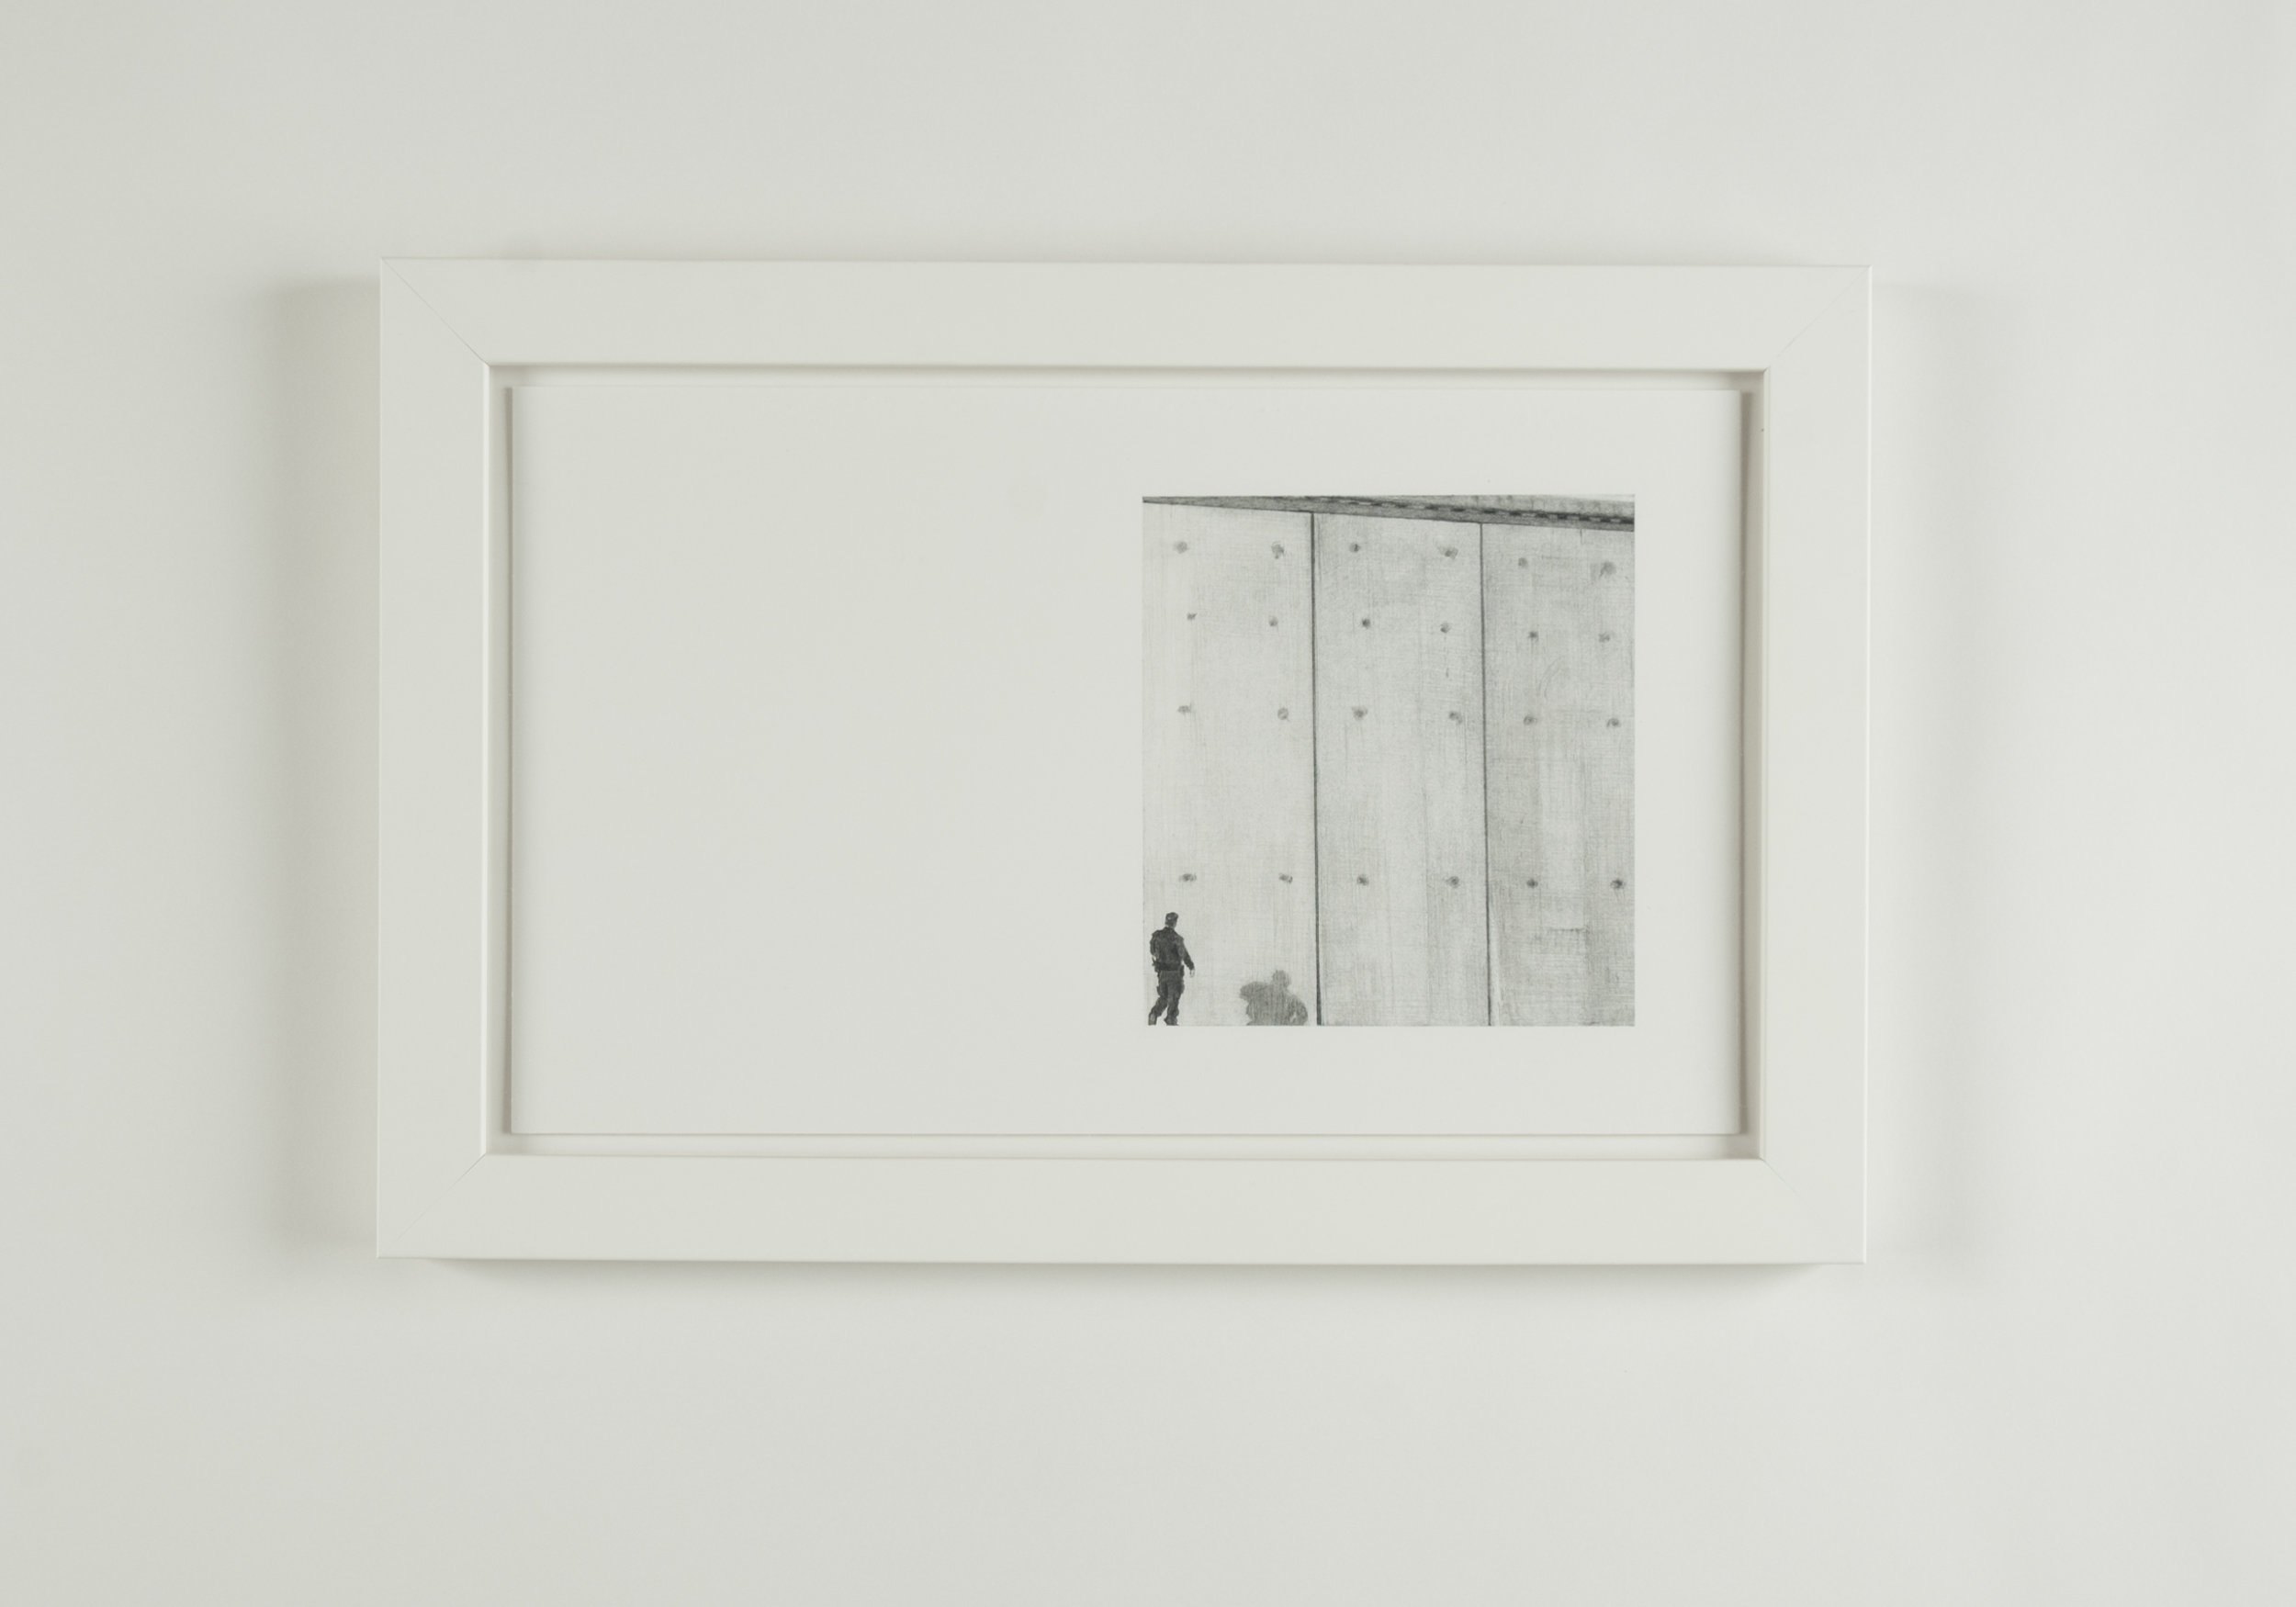   Untitled (Rumination on Borders, I),  2019  Detail 3 of 4 Graphite on Paper  43 x 28.5 cm (17 x 11.25 inches)  Source Image: Image of a prototype for the US-Mexico Border Wall photographed by Mario Tama, Getty Images. 